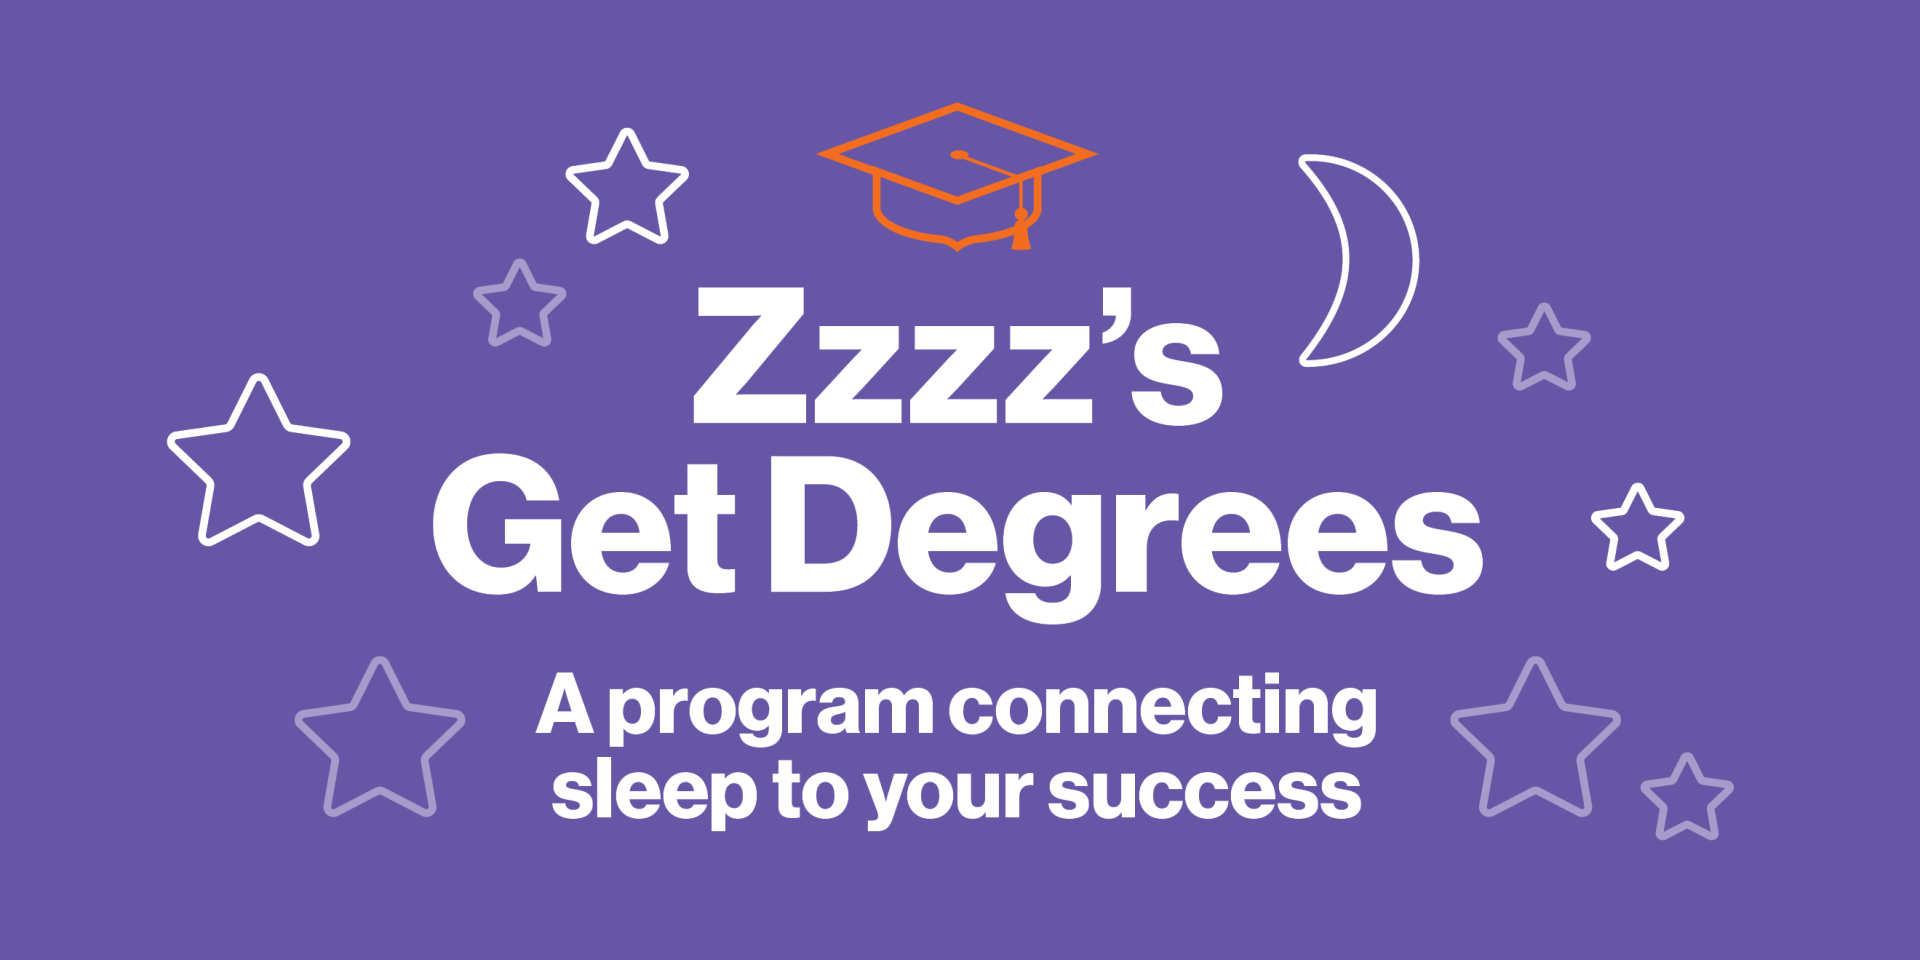 Zzzz's Get Degrees A program connecting sleep to your success